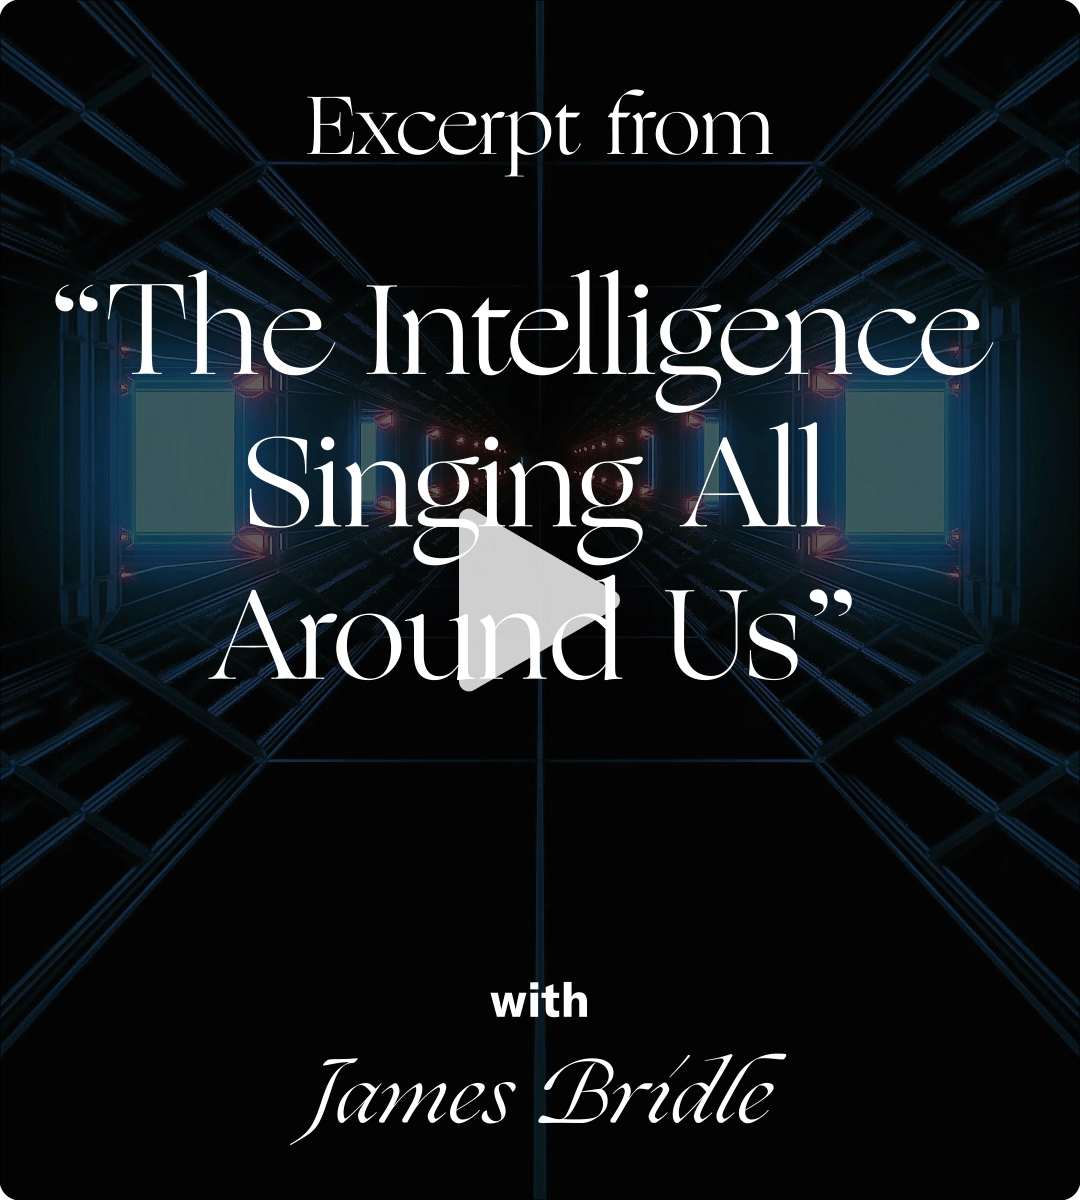 Gif of a video with a play button visible. The title card of the video reads: Excerpt from 'The Intelligence Singing All Around Us' with James Bridle.